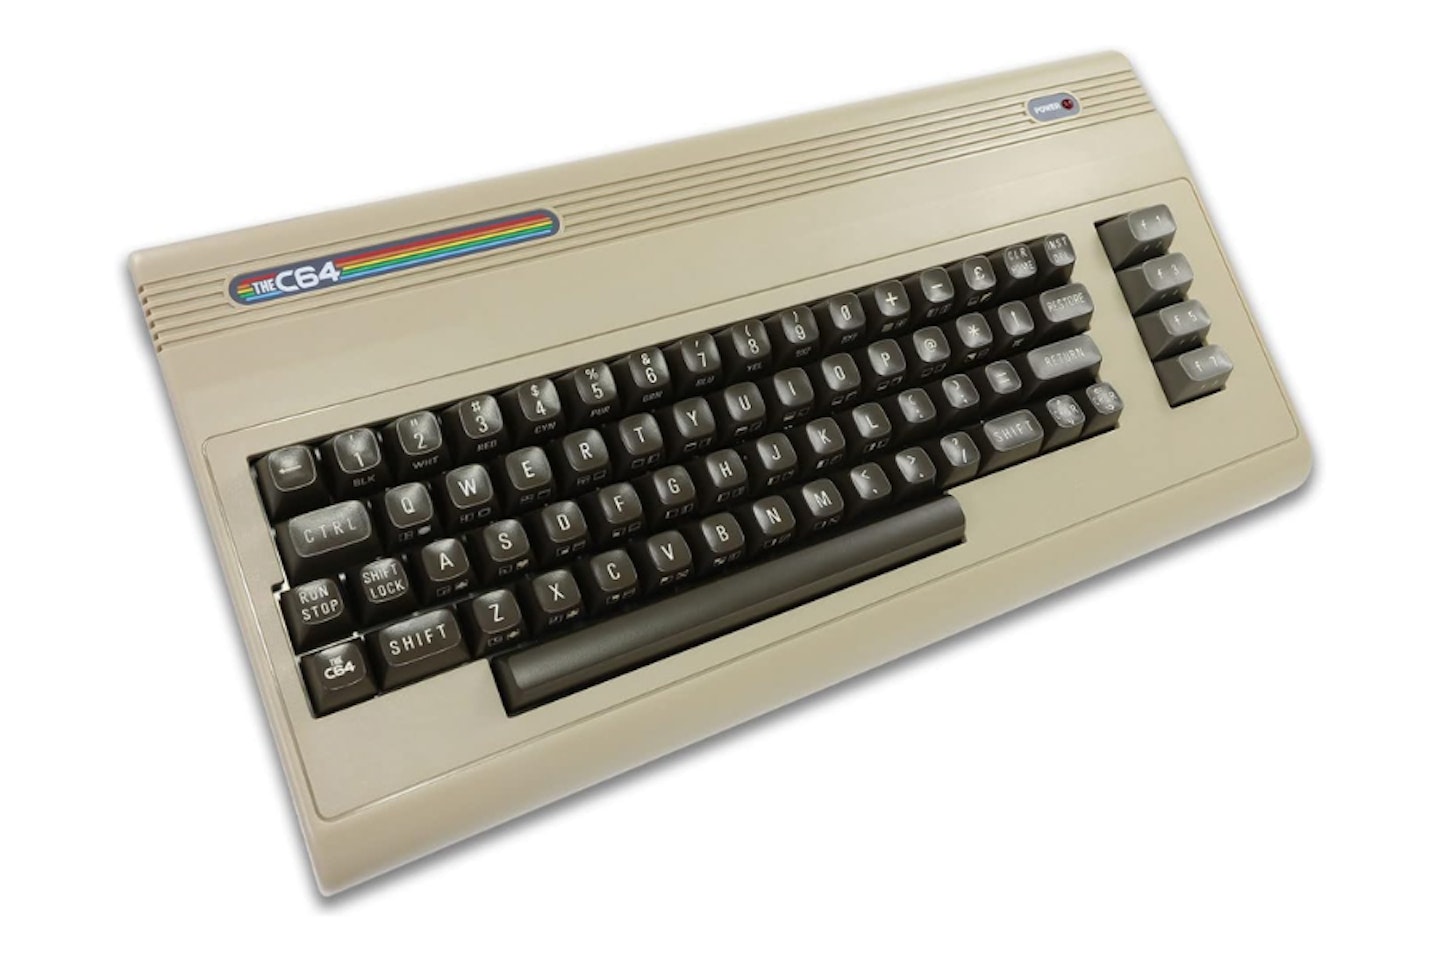 The C64 (full-size)  - an example of the best retro game console